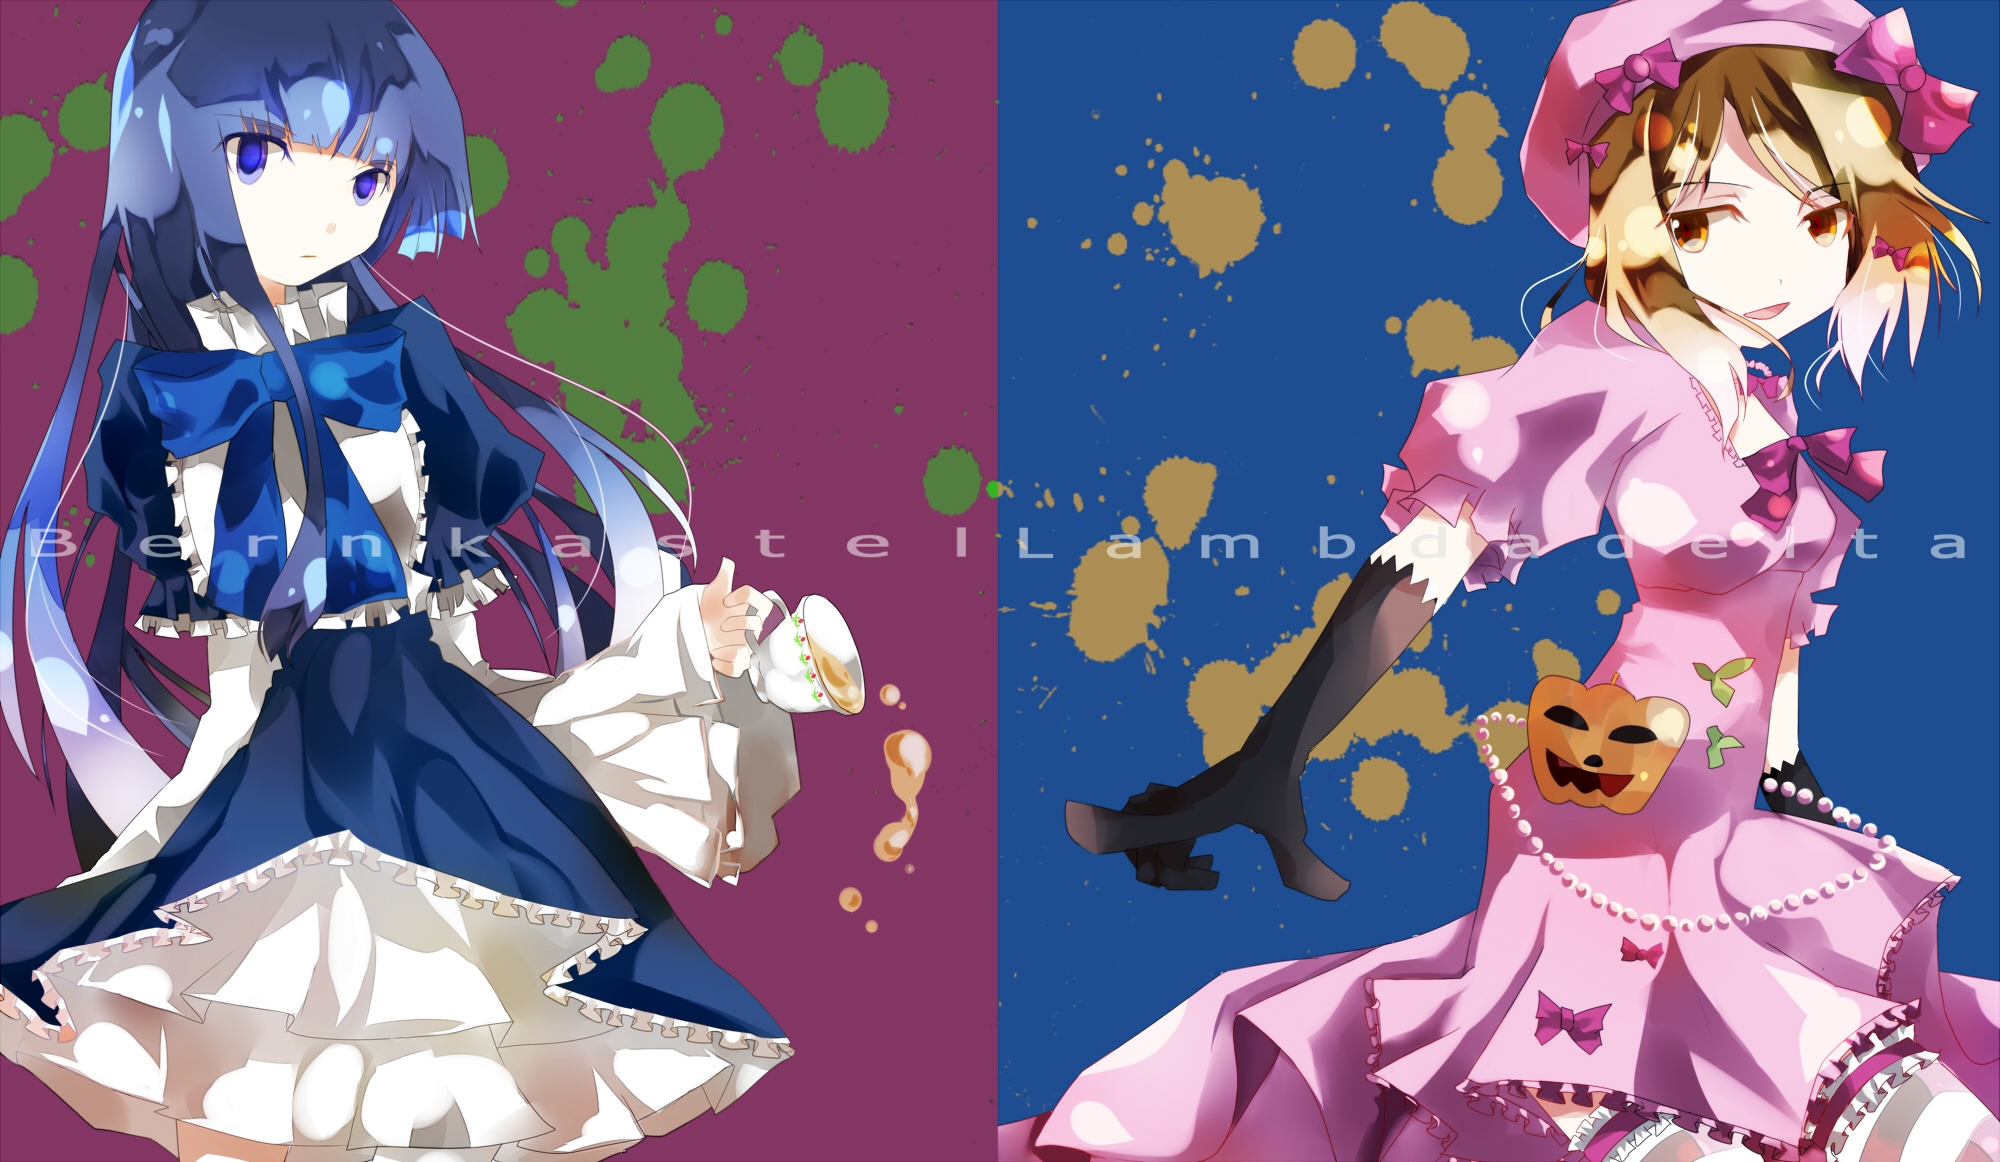 Umineko: When They Cry HD Wallpaper by いとうみなと